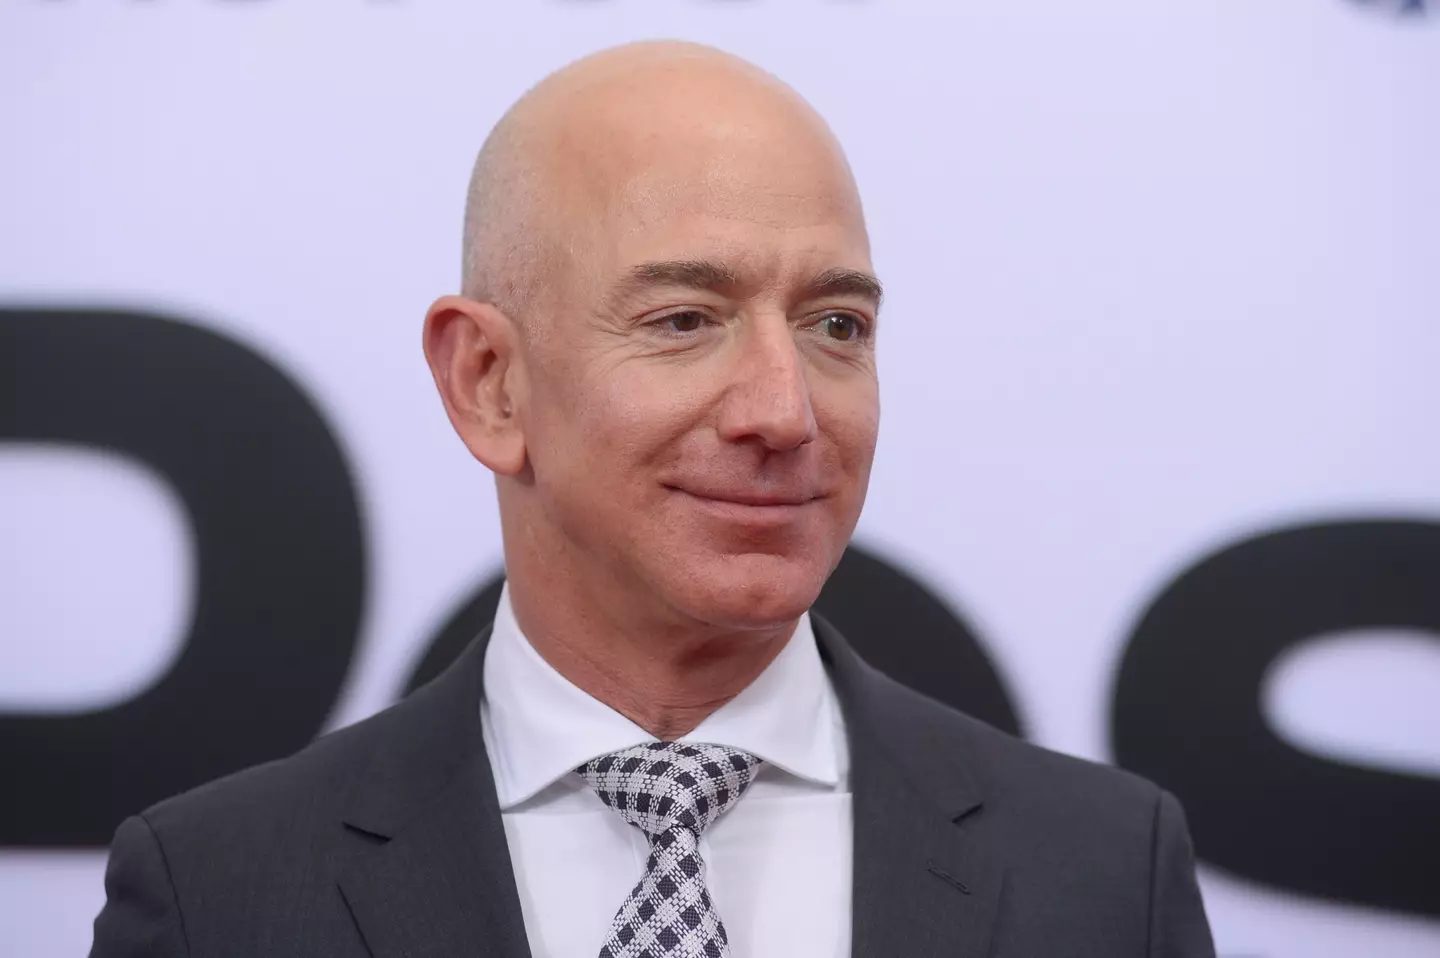 Jeff Bezos could be among those who fund the trial.